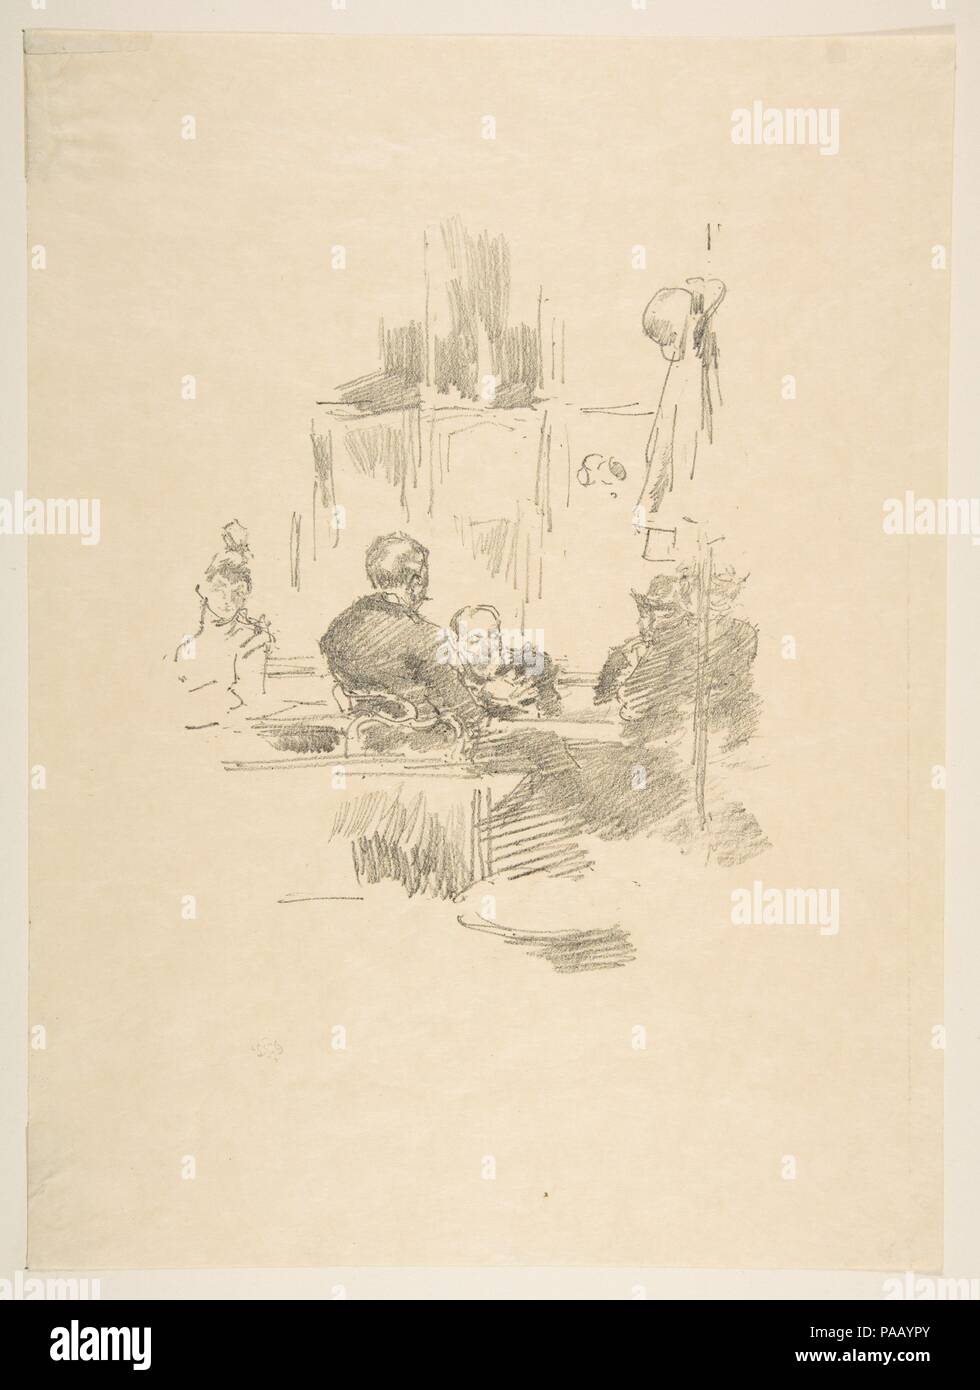 Late Picquet. Artist: James McNeill Whistler (American, Lowell, Massachusetts 1834-1903 London). Dimensions: Image: 7 9/16 × 6 1/8 in. (19.2 × 15.5 cm)  Sheet: 12 1/8 × 9 1/16 in. (30.8 × 23 cm). Date: 1894. Museum: Metropolitan Museum of Art, New York, USA. Stock Photo